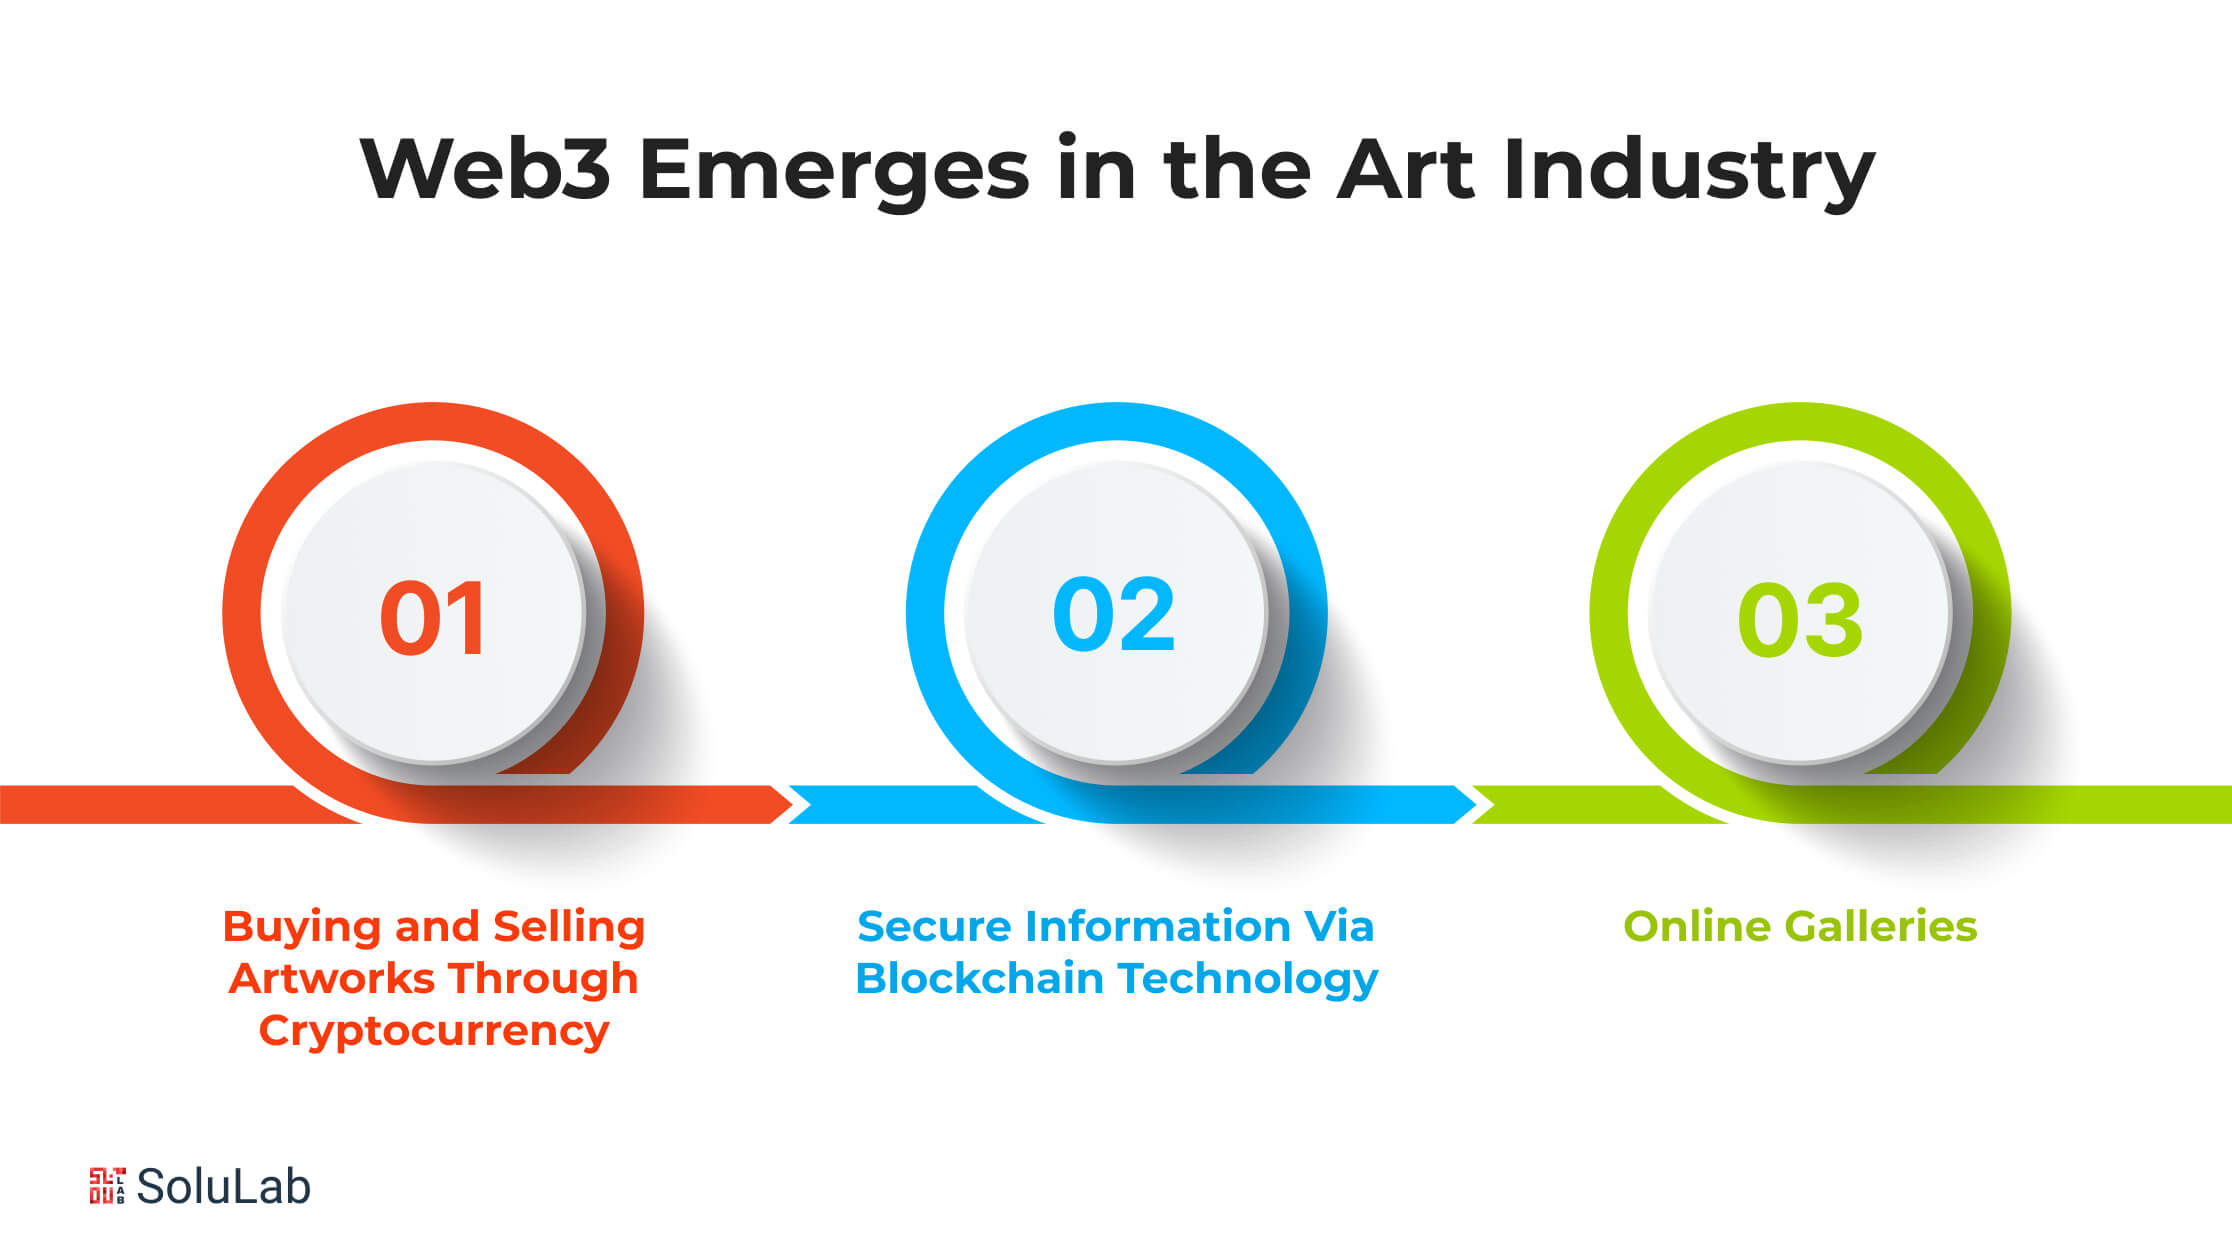 Web3 Emerges in the Art Industry